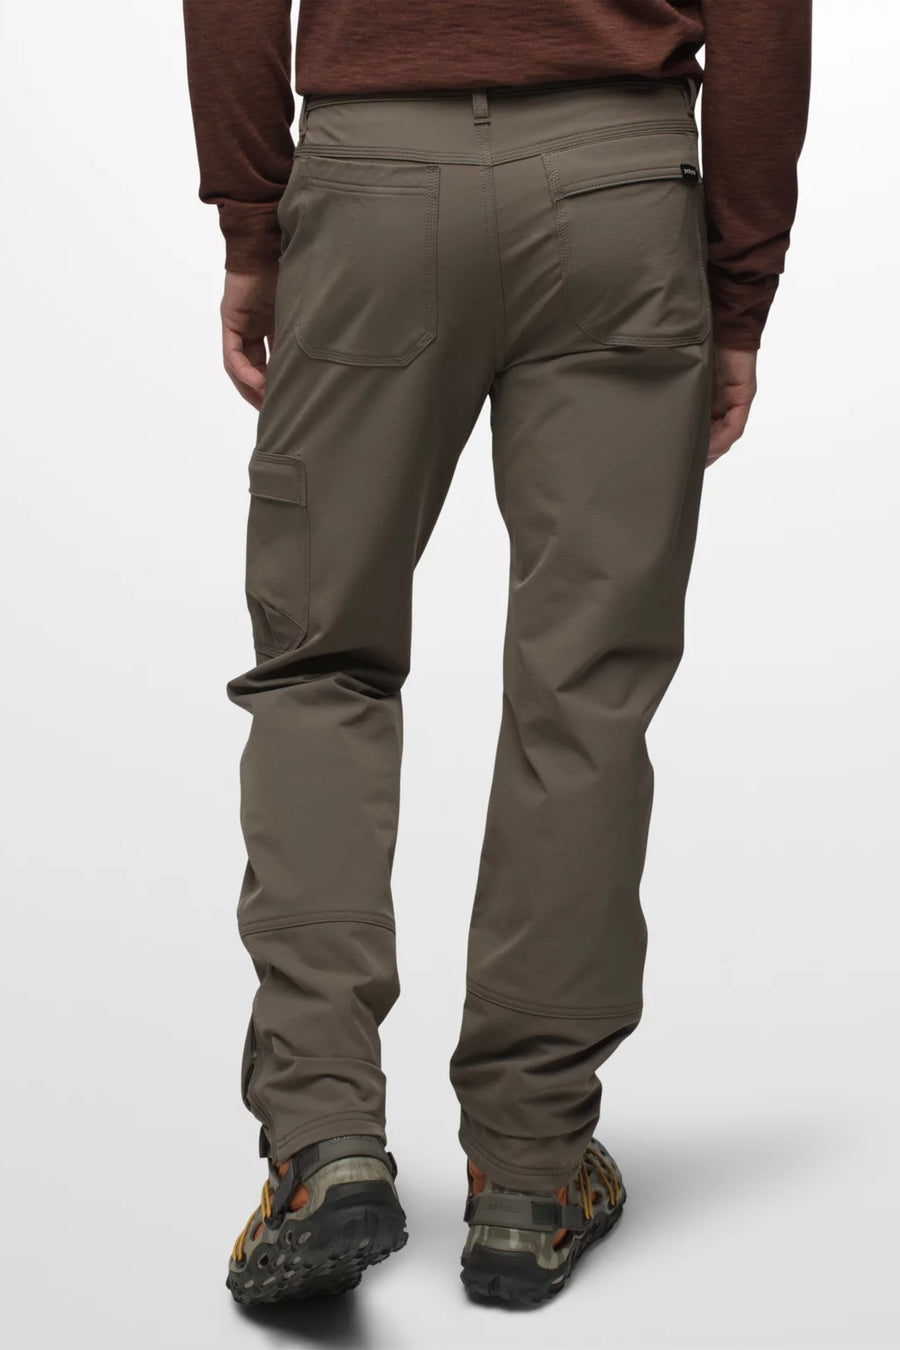 Stretch Zion AT Pant - Men's 32" Inseam